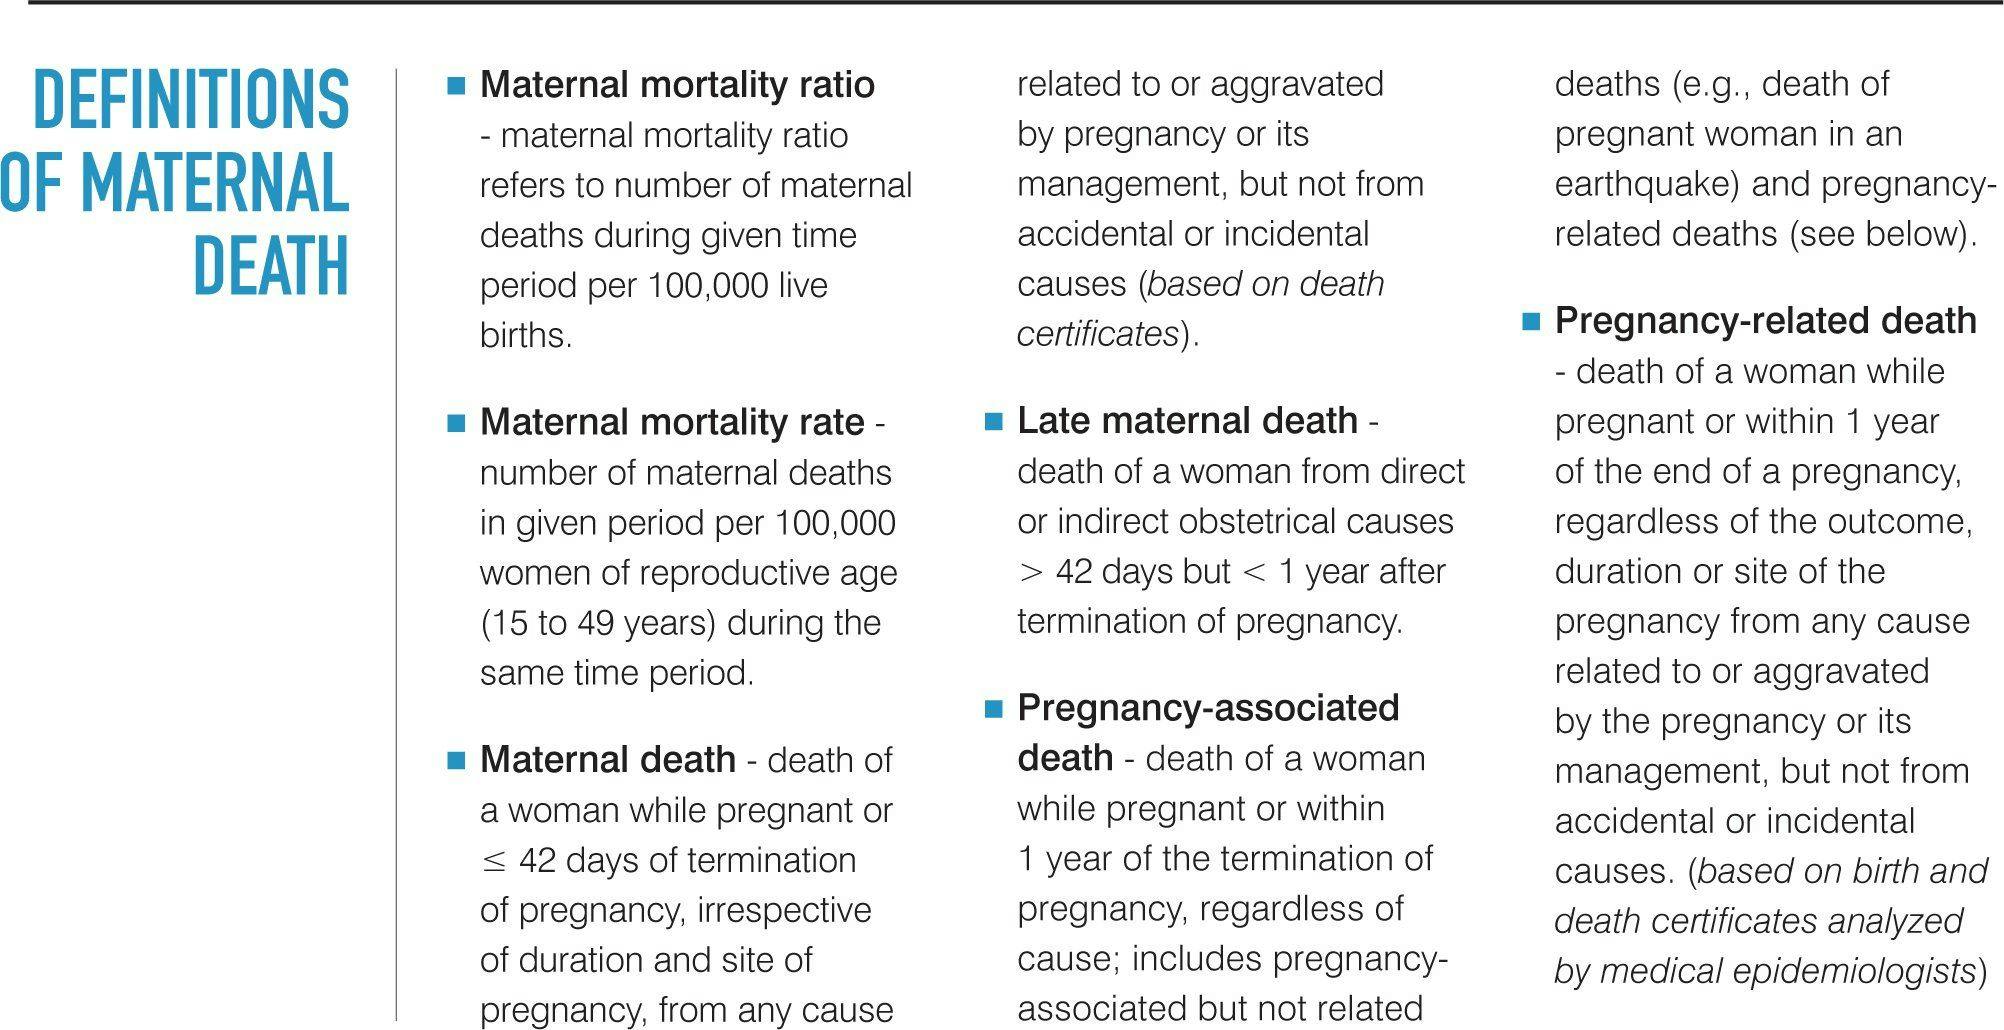 Definitions of maternal death